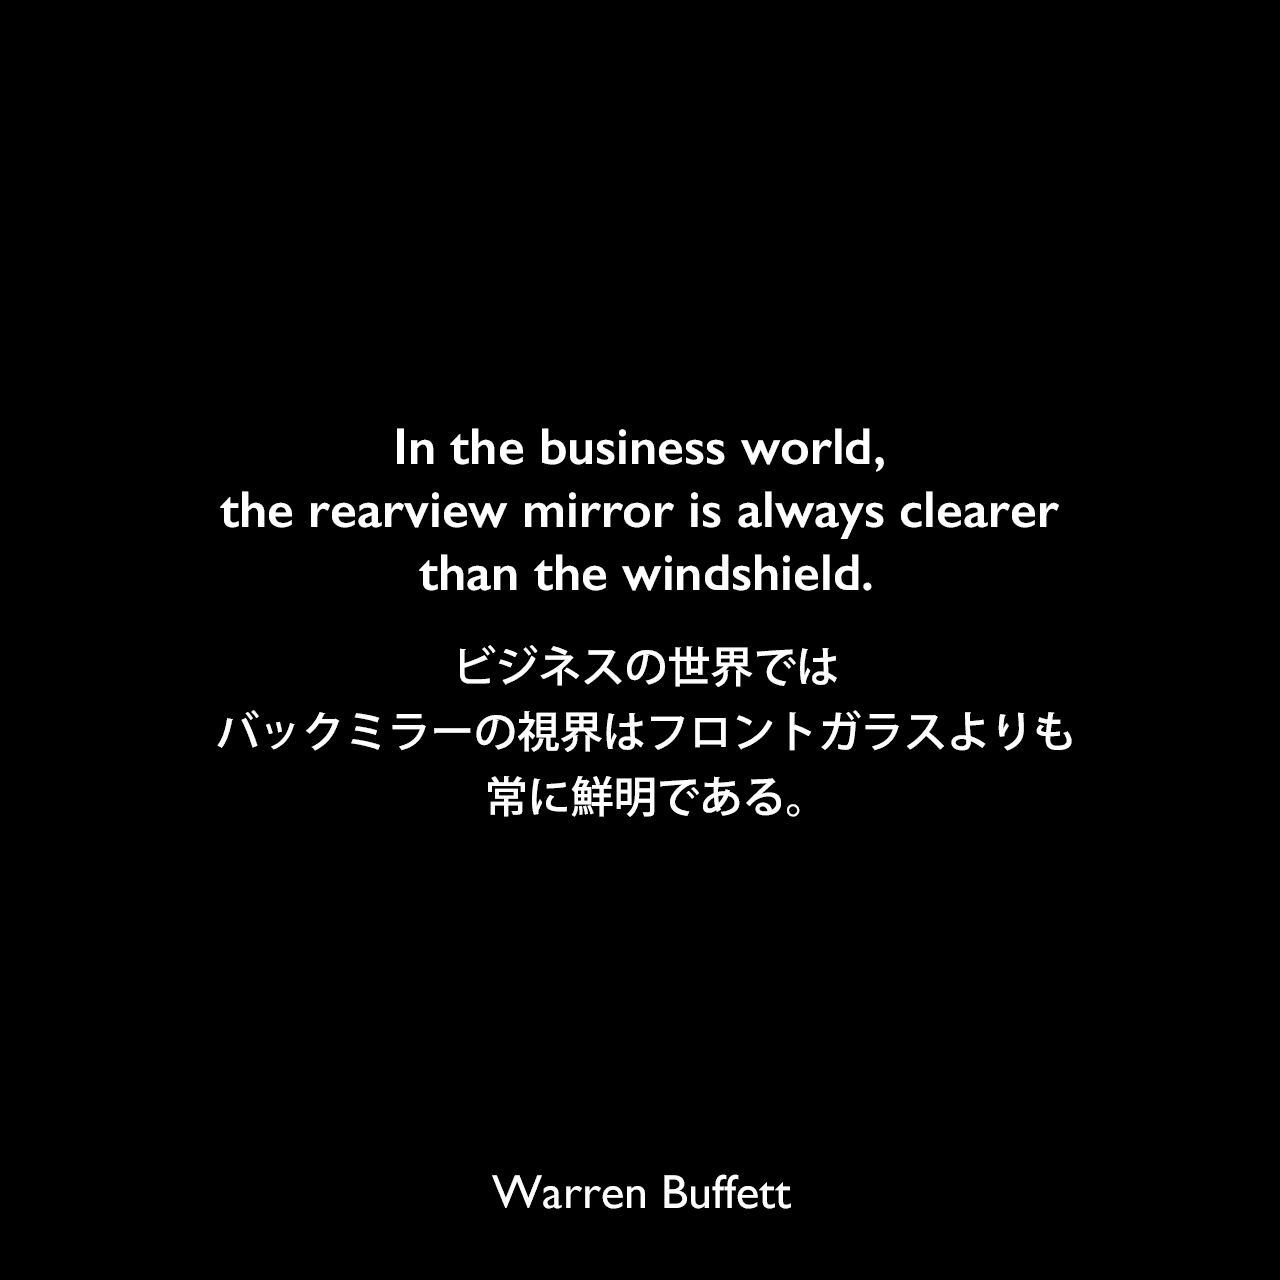 In the business world, the rearview mirror is always clearer than the windshield.ビジネスの世界では、バックミラーの視界はフロントガラスよりも常に鮮明である。Warren Buffett